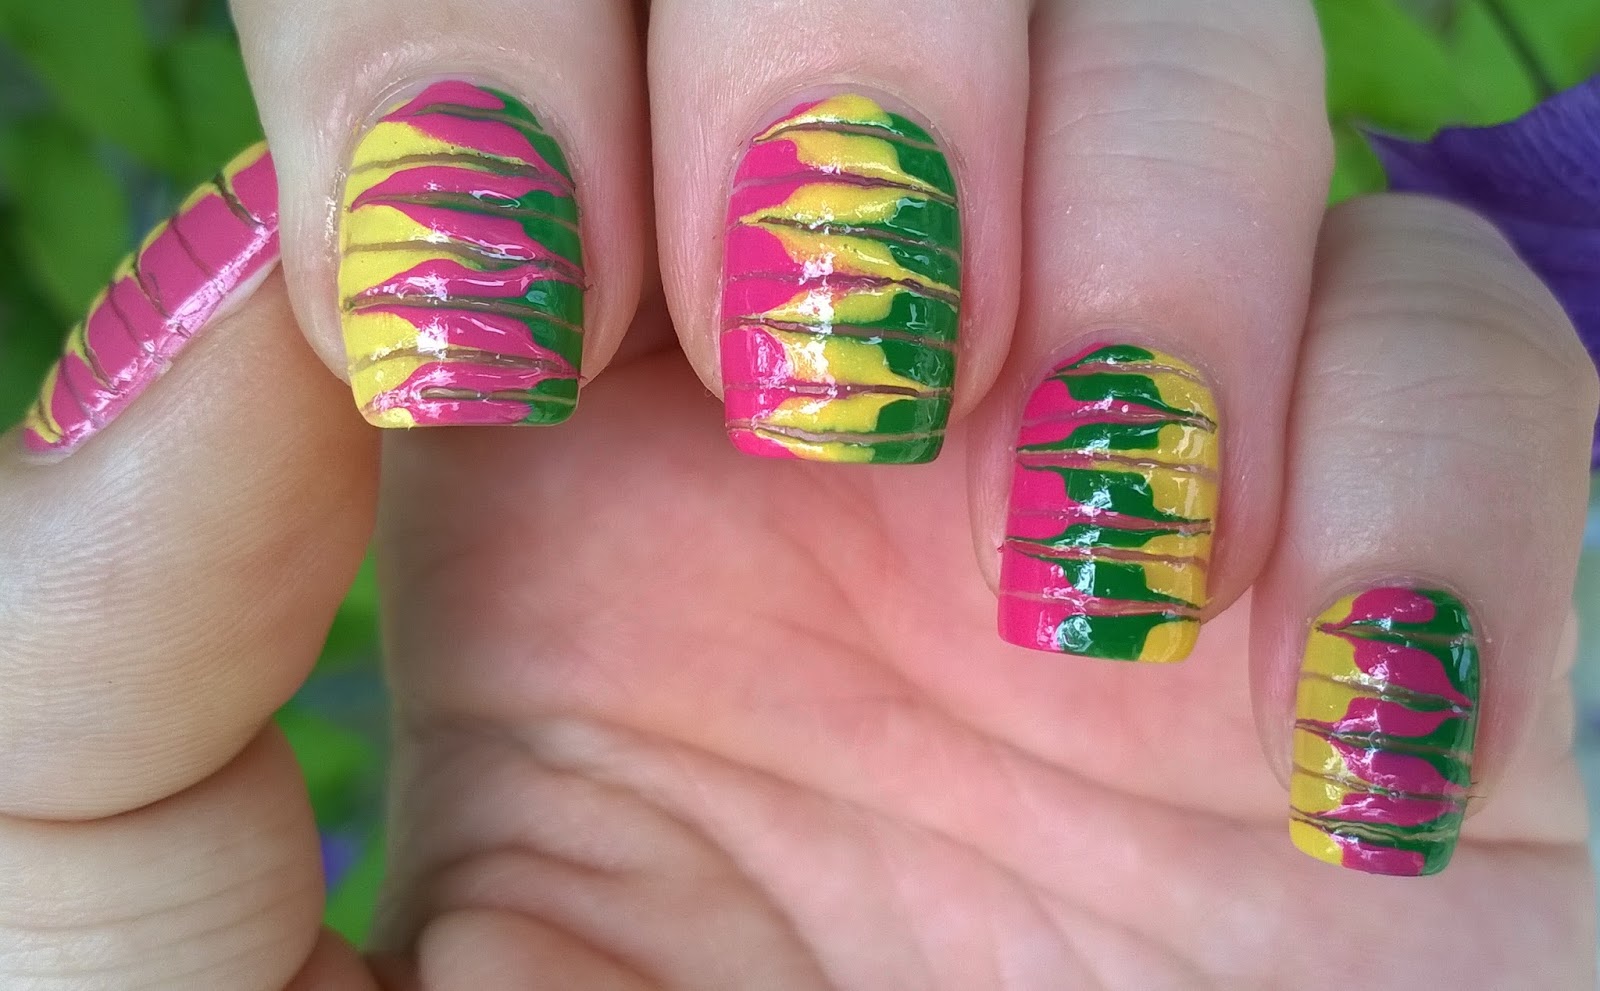 1. "Easy Toothpick Nail Art Tutorial" - wide 4